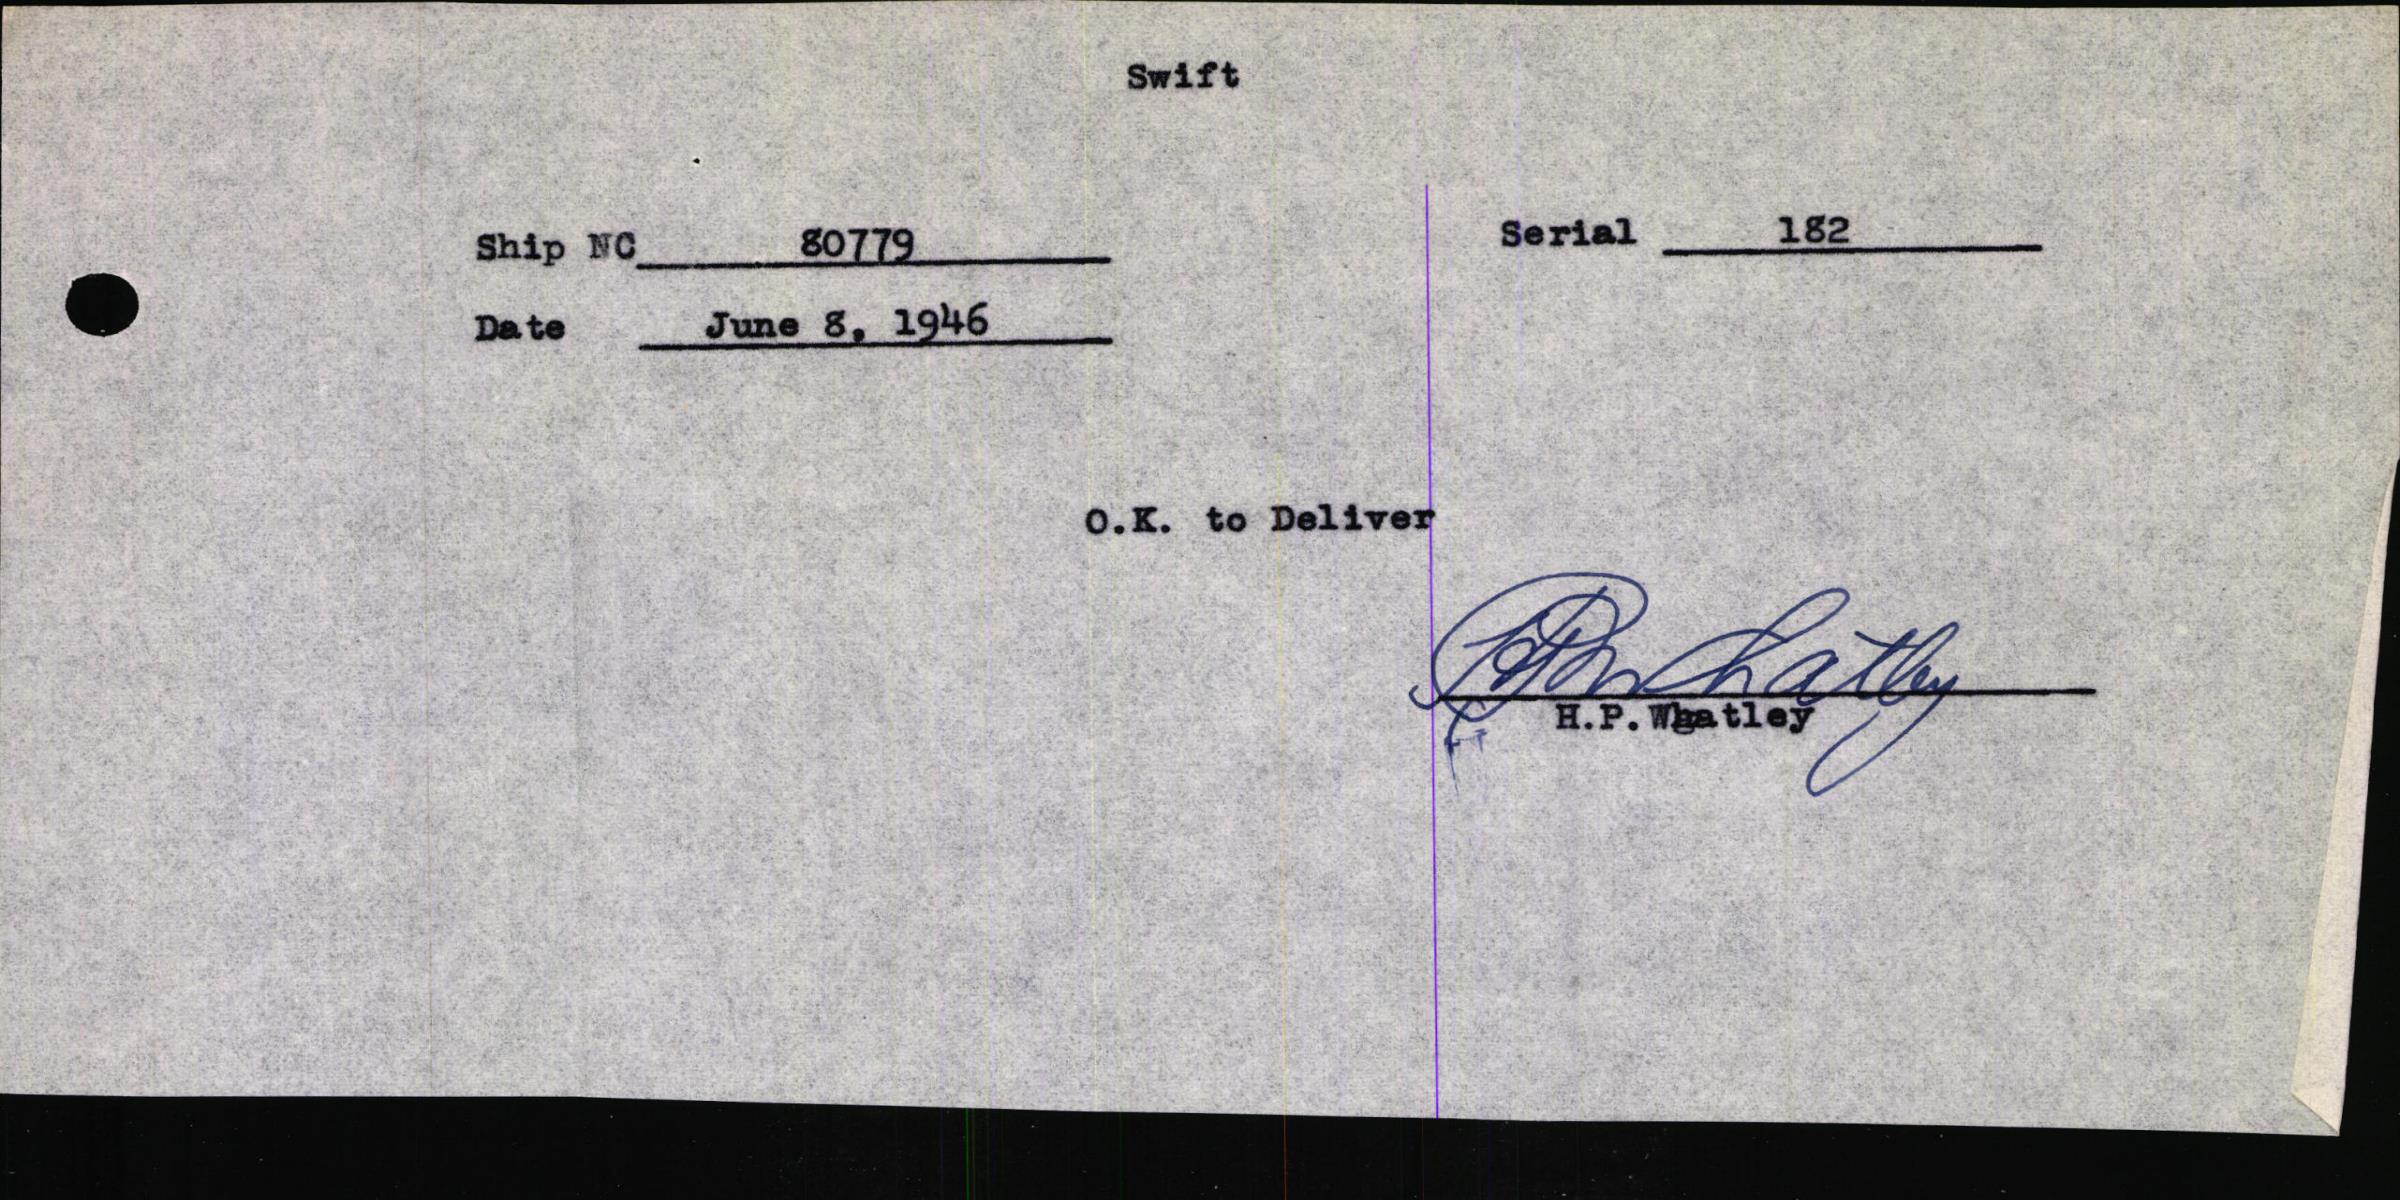 Sample page 3 from AirCorps Library document: Technical Information for Serial Number 182